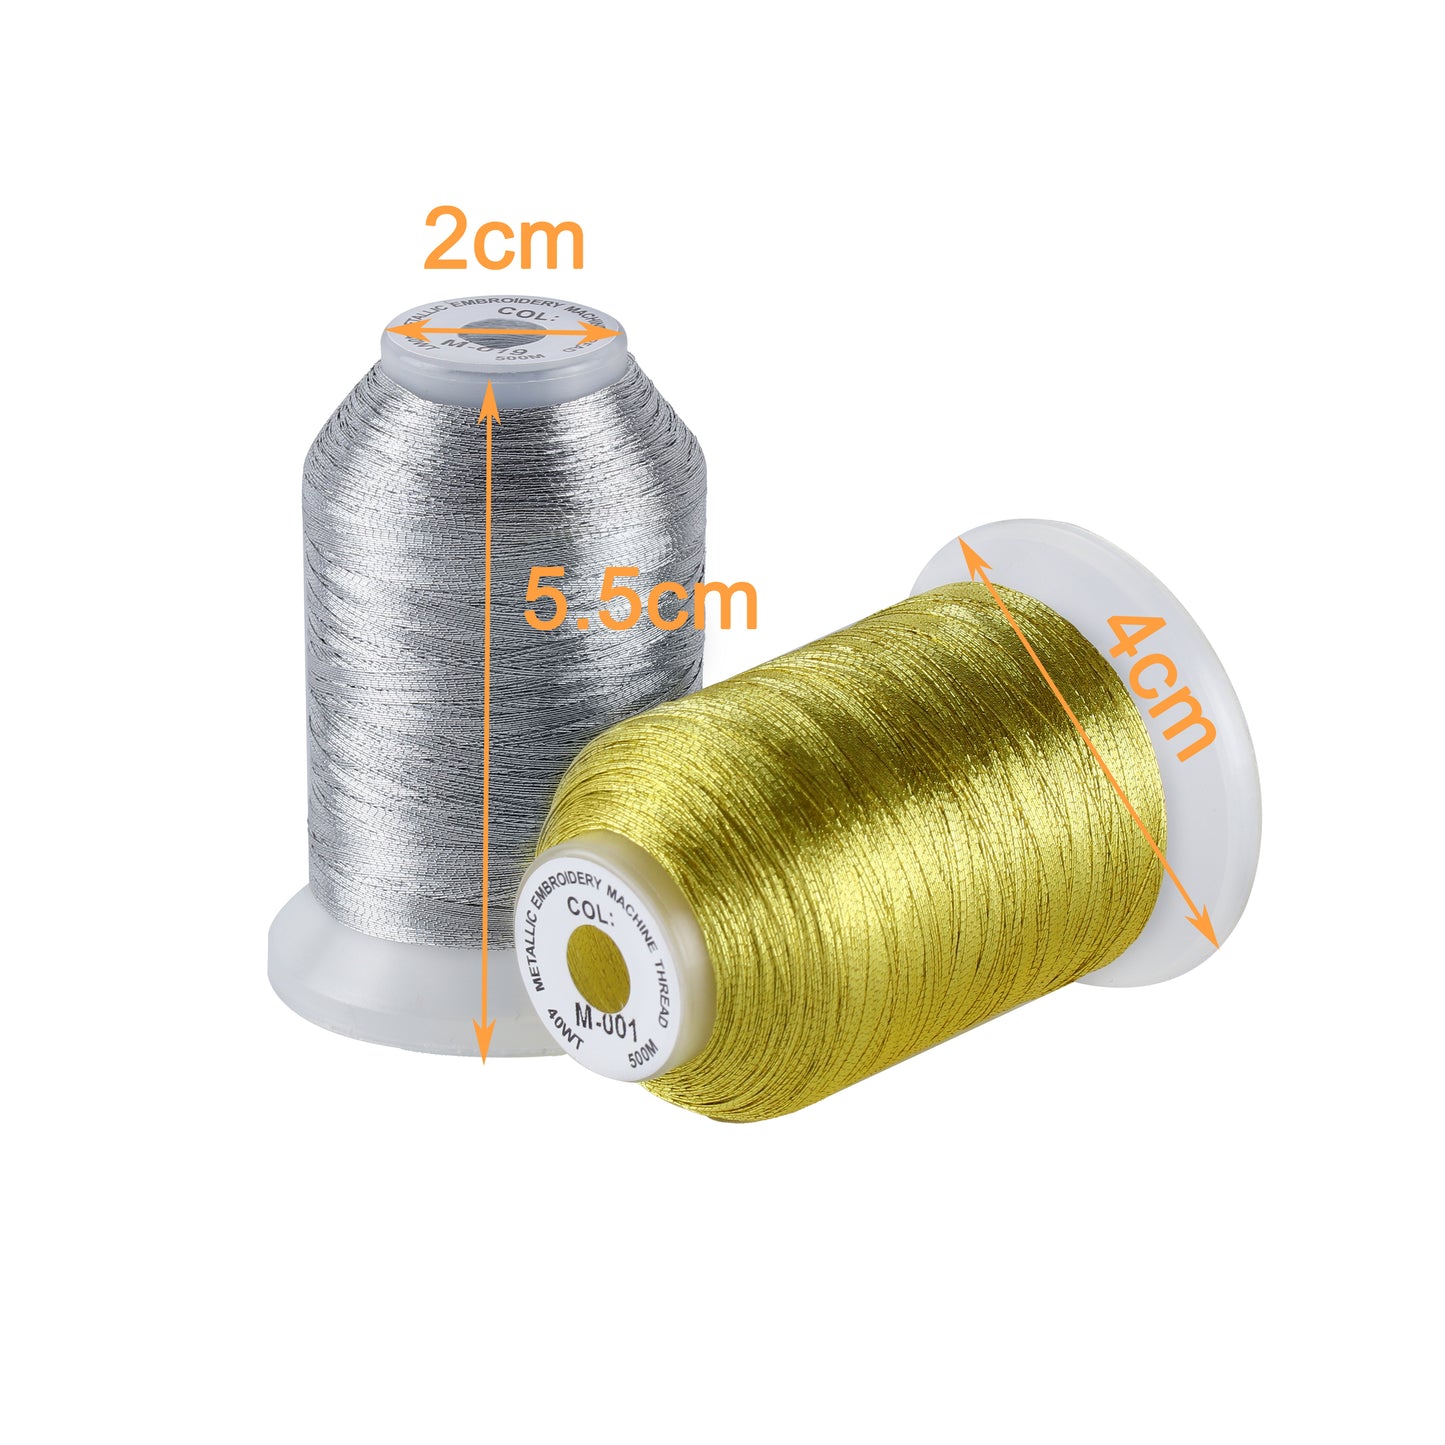 Simthread Embroidery Thread 5500 Yards Red 800, 40wt 100% Polyester for  Brother, Babylock, Janome, Singer, Pfaff, Husqvarna, Bernina Machine